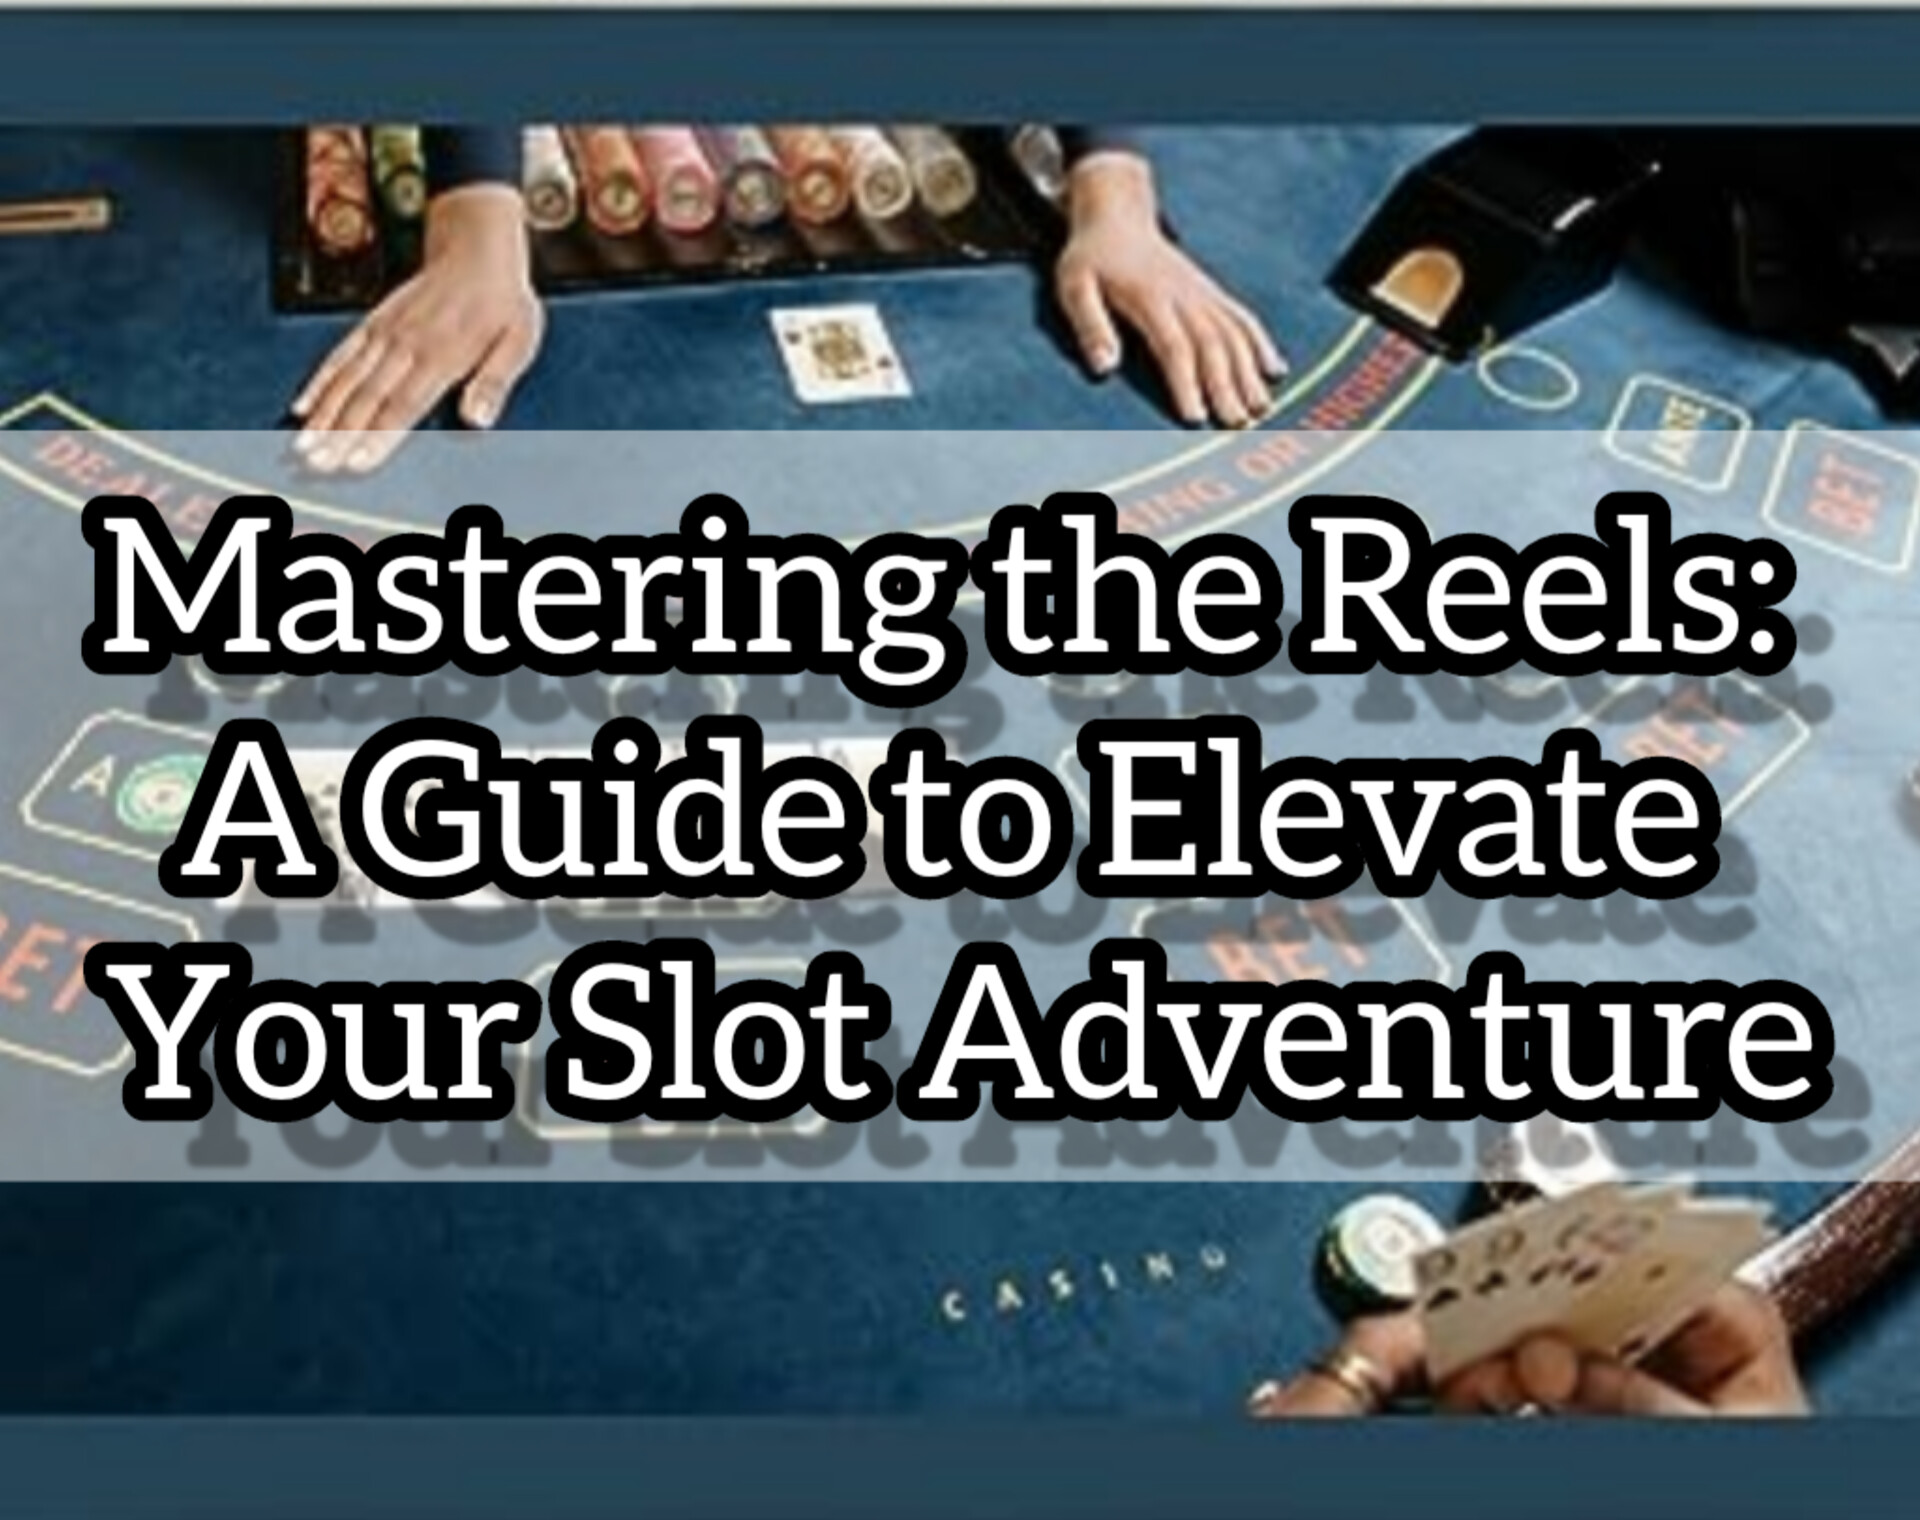 Mastering the Reels: A Guide to Elevate Your Slot Adventure